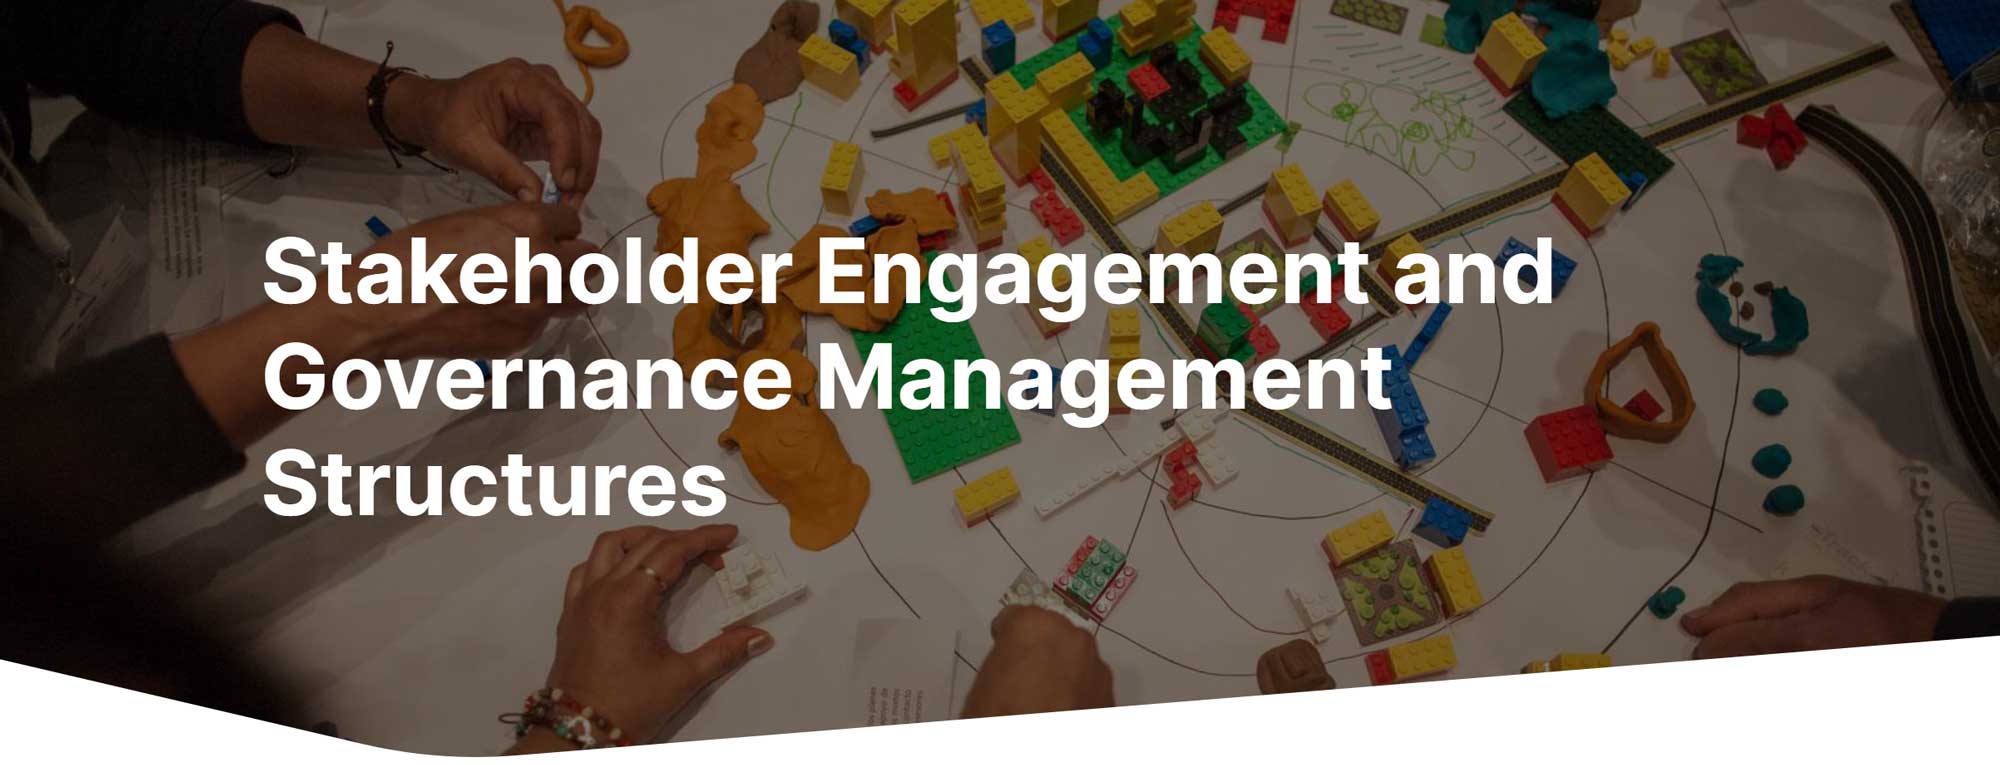 Stakeholder Engagement and Governance Management Structures Course